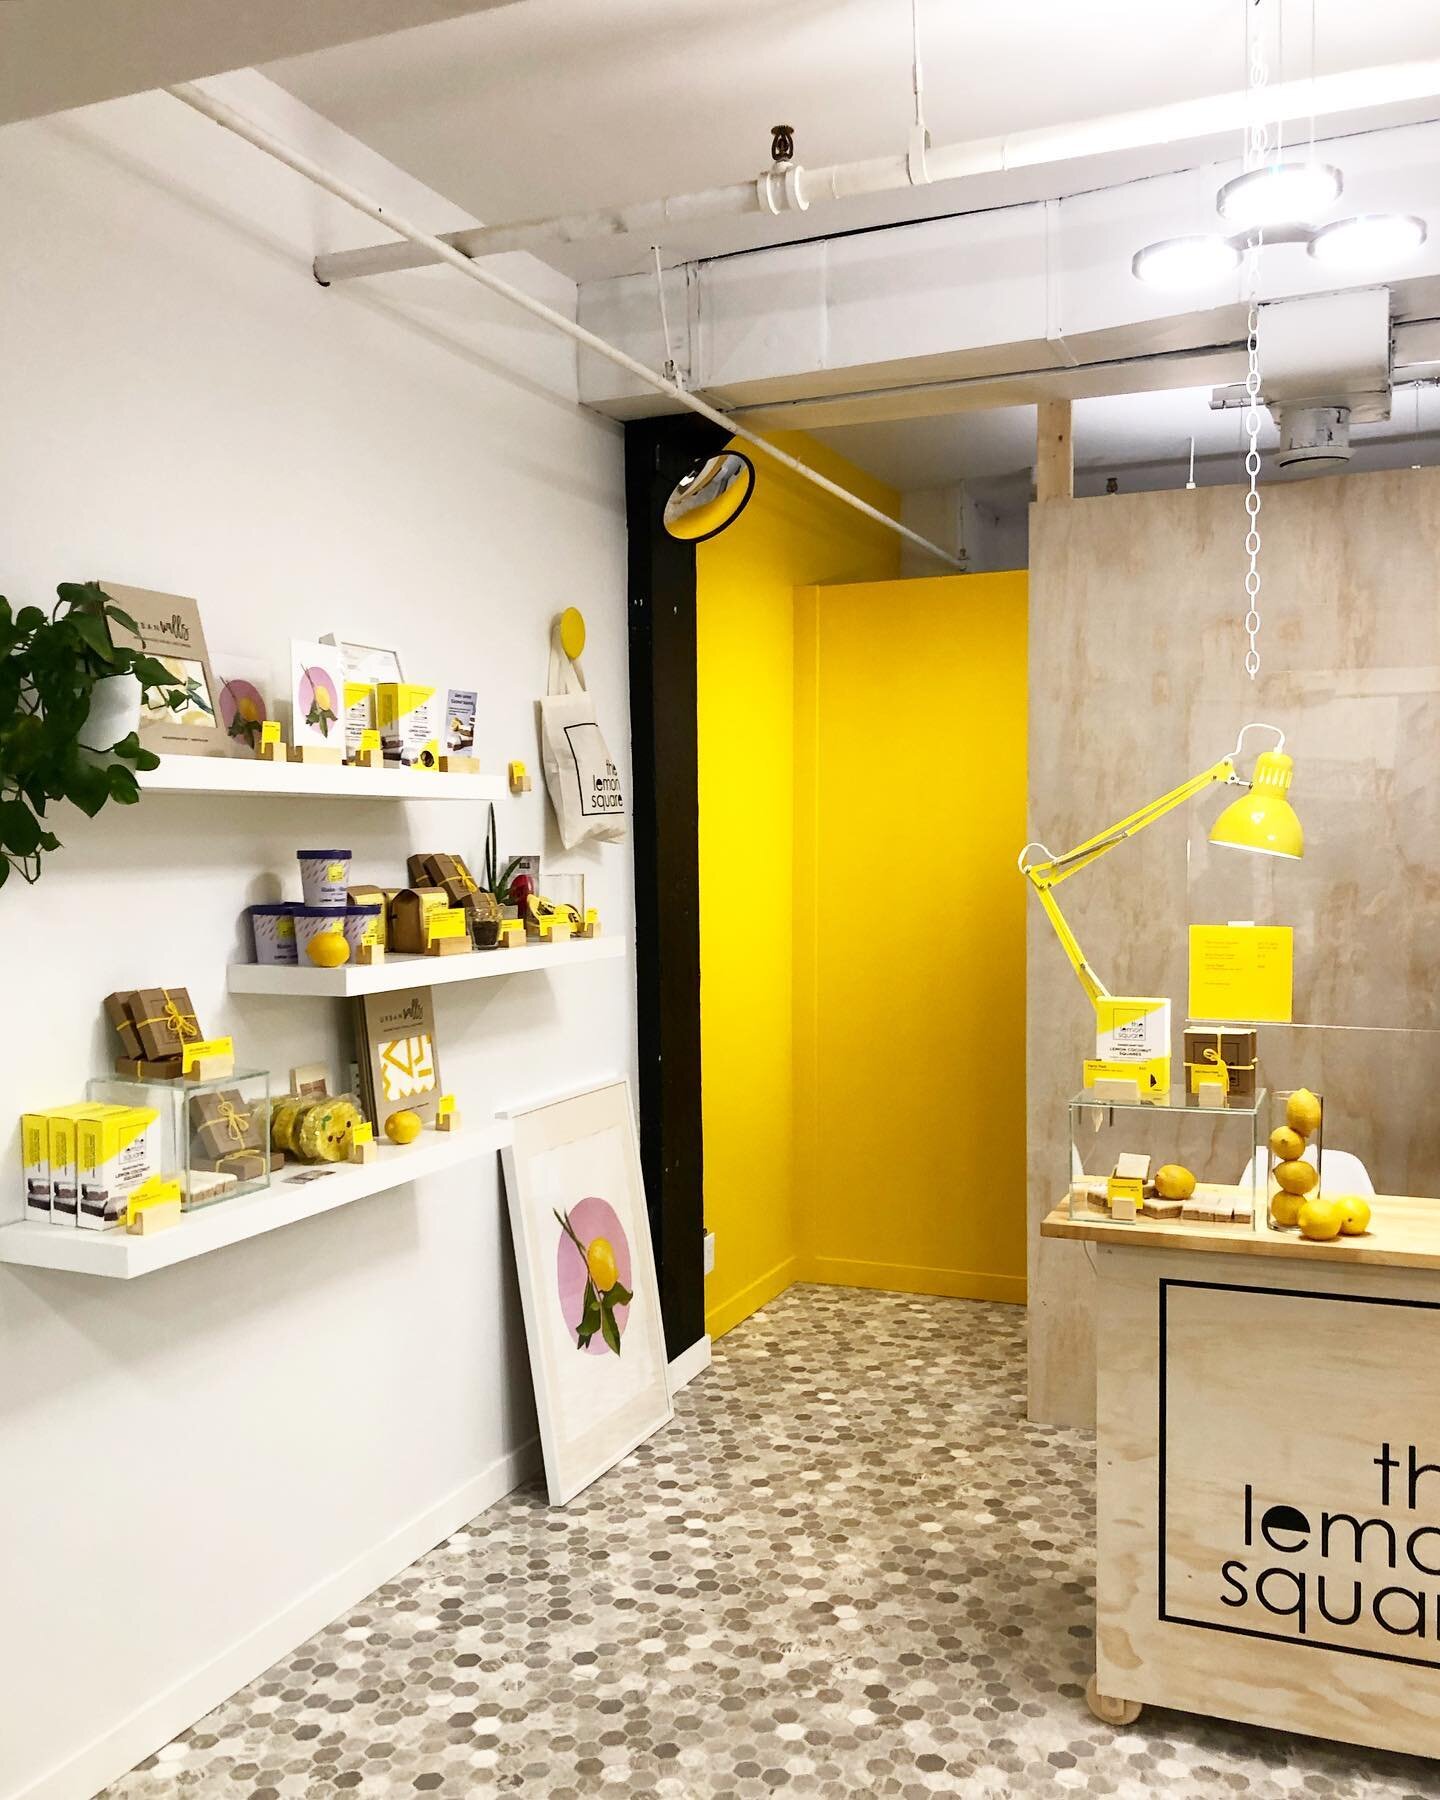 Our #gastown store is closed on Mondays and Tuesdays but open every other day. We&rsquo;re busy working on some new and exciting things behind the scenes. Stay tuned! 🍋🍋🍋 Can you guess what we&rsquo;re working on?